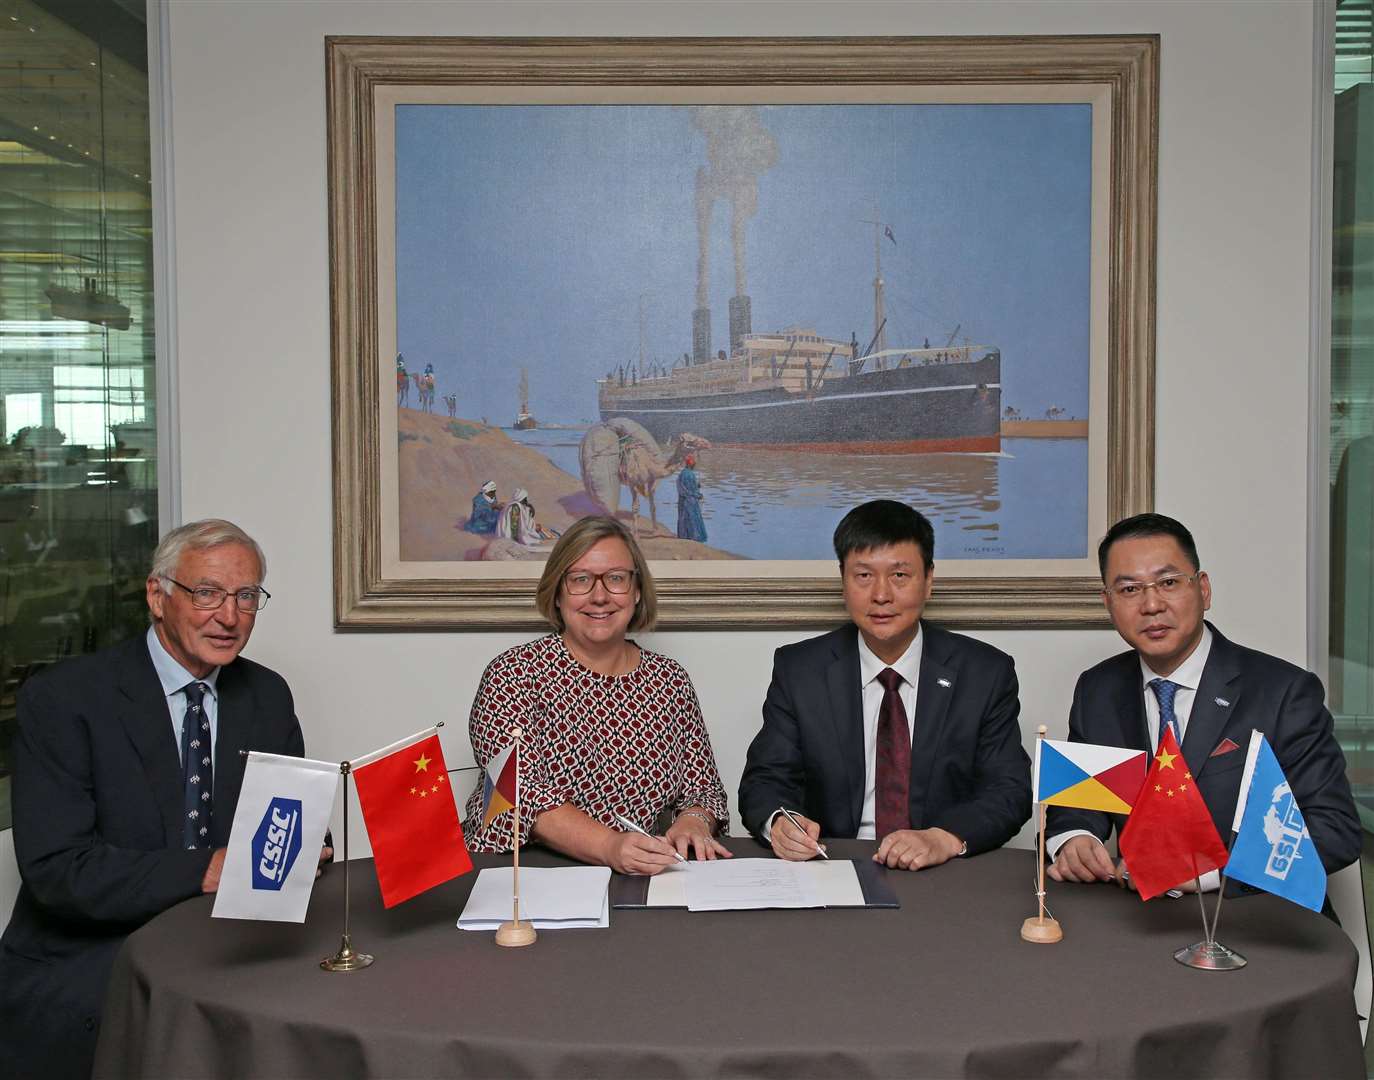 P&O boss Janette Bell following the agreement with ship builders Guangzhou who will make the carbon neutral super ferries